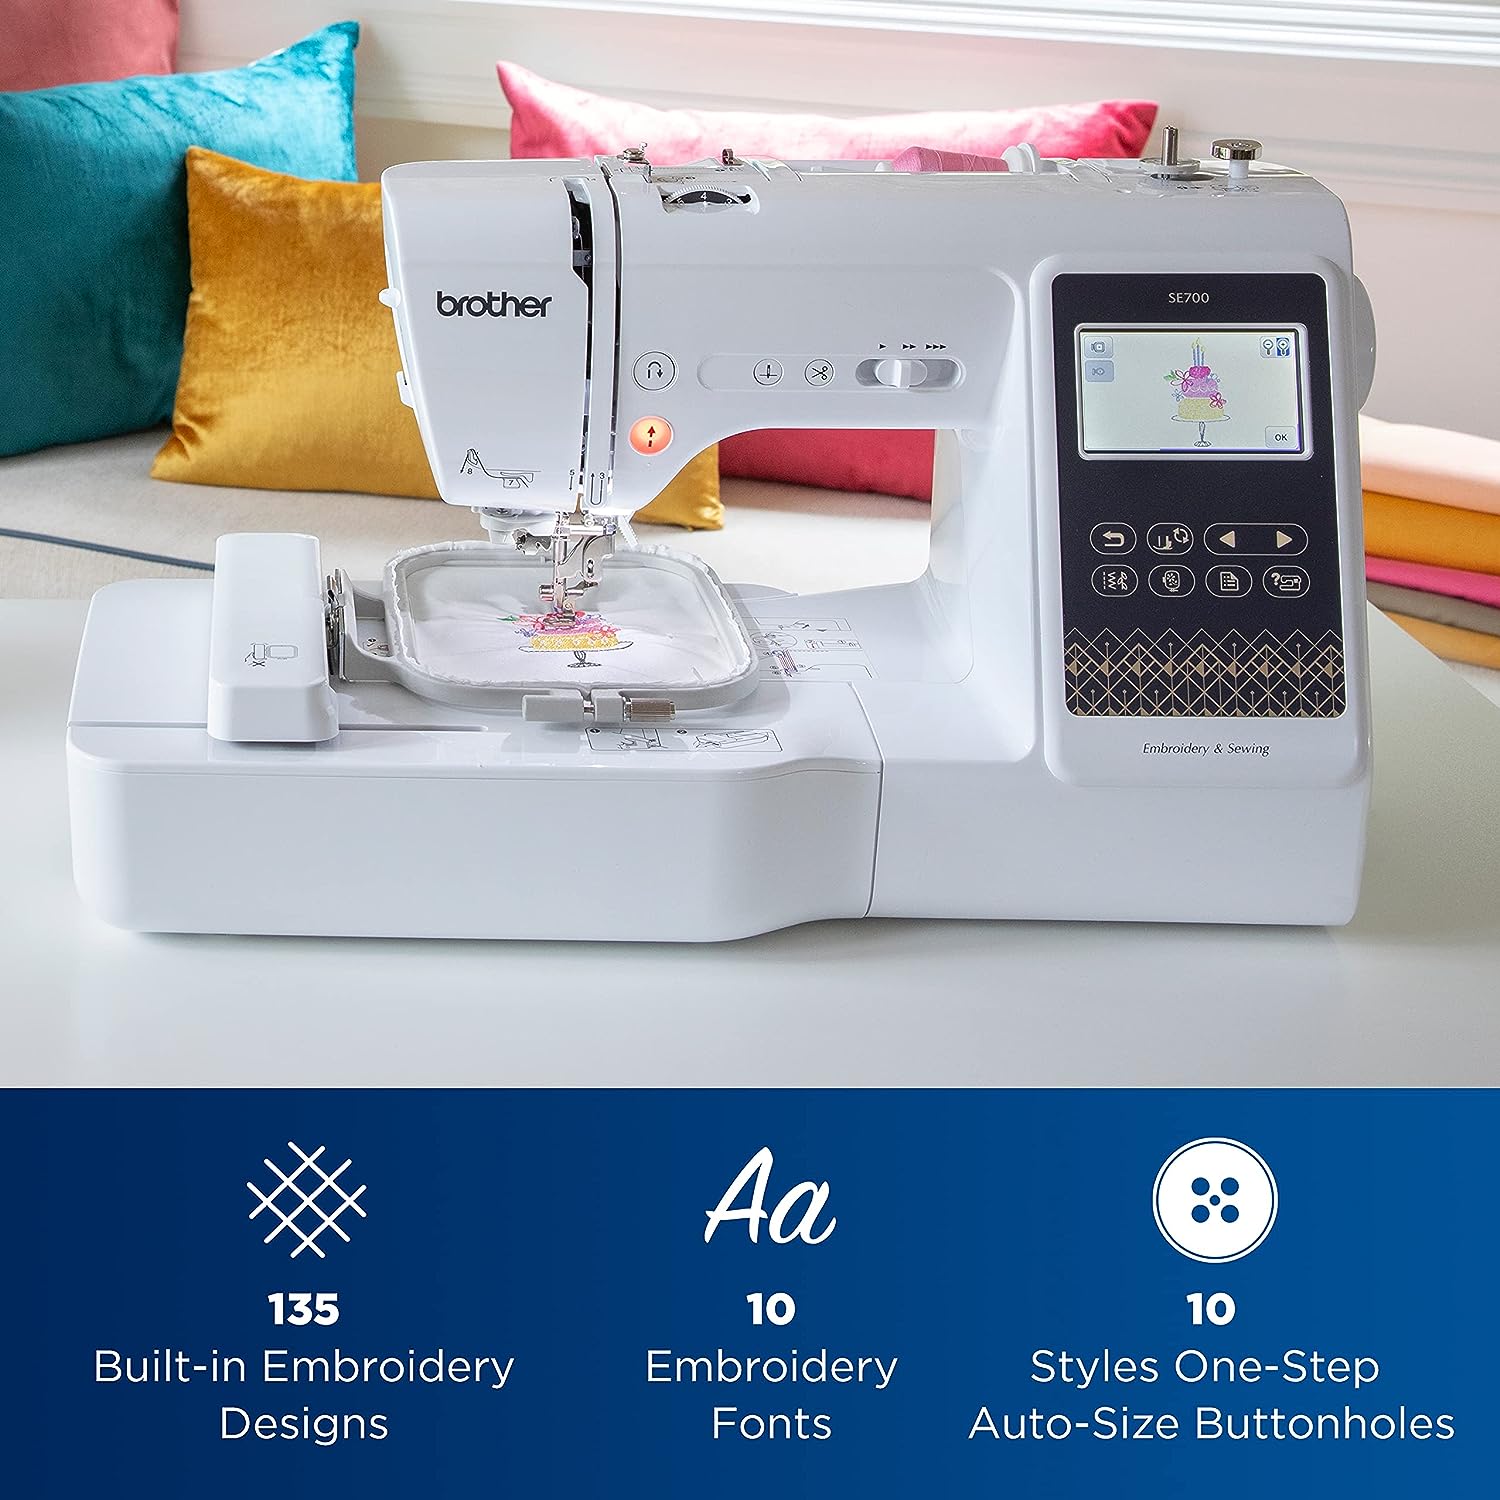 Brother SE700 Sewing Machine Review